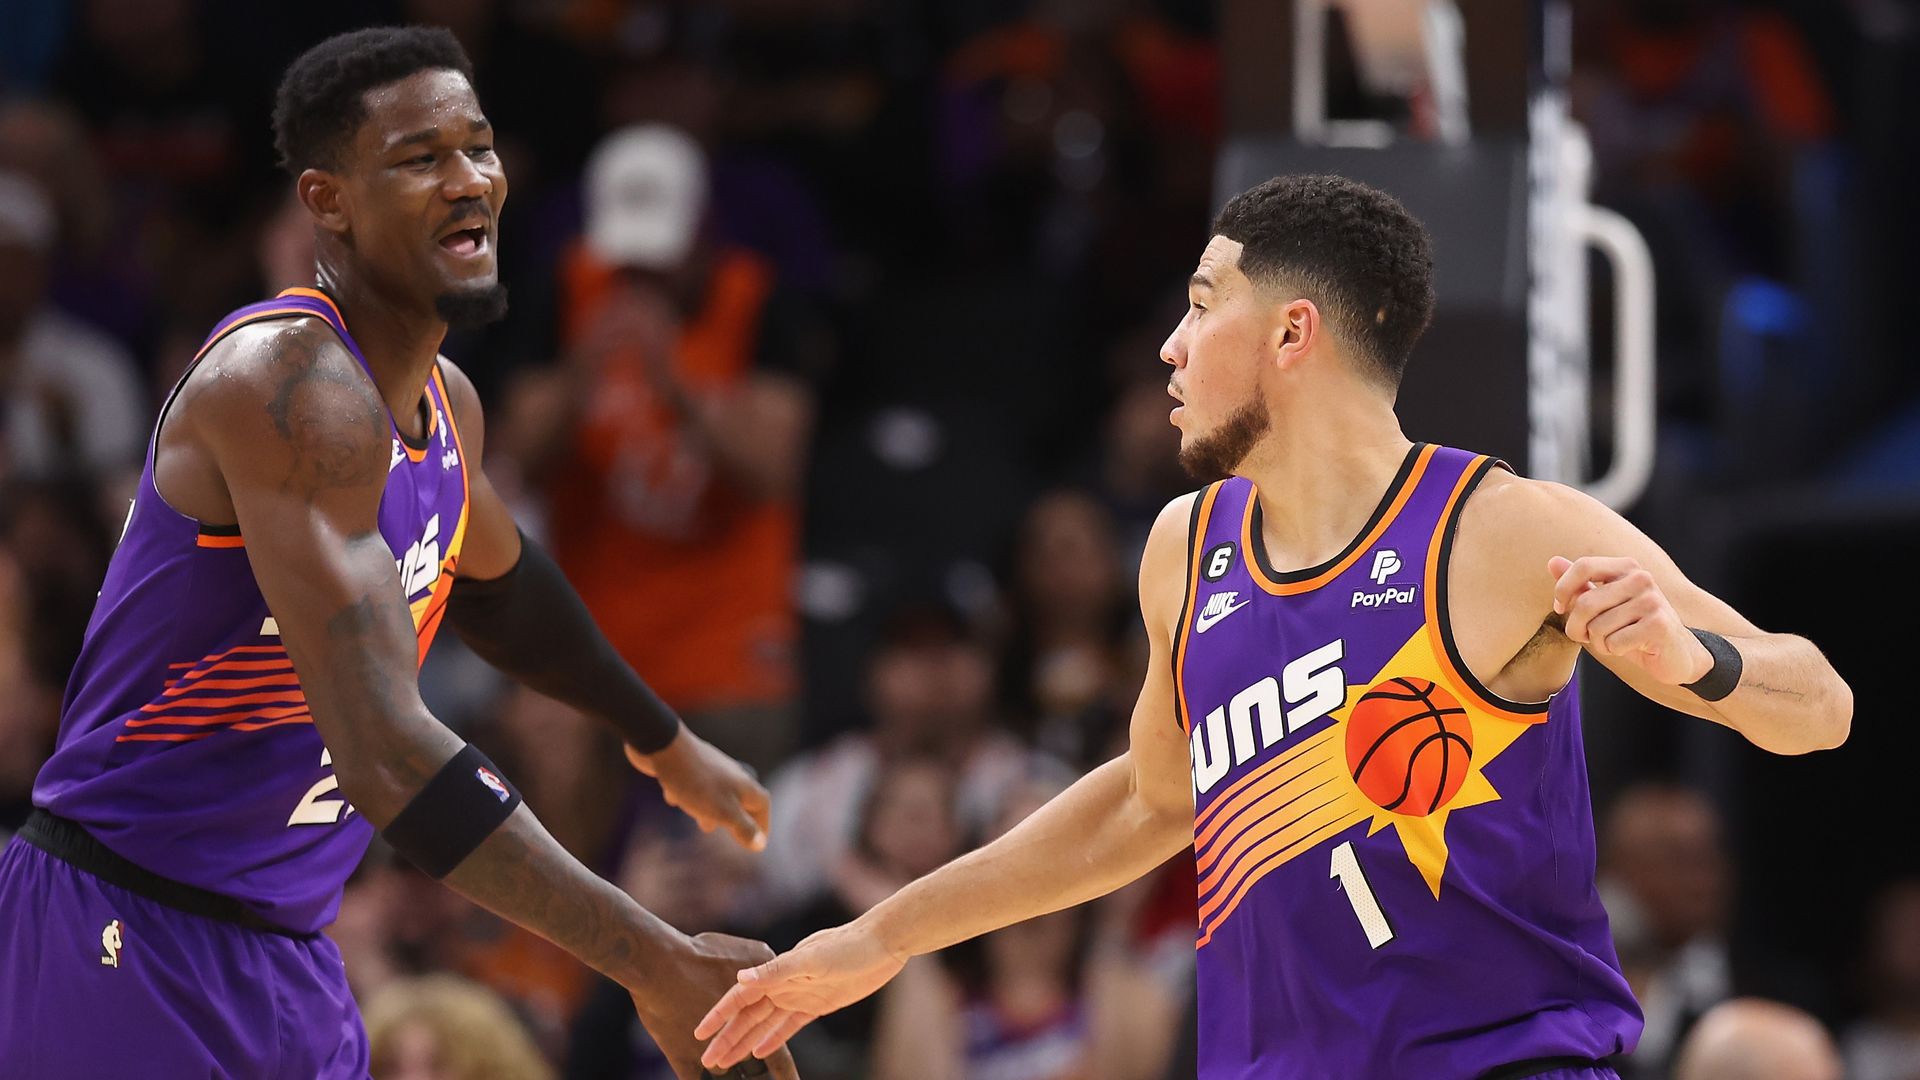 Deandre Ayton and Devin Book slap hands in celebration during a Phoenix Suns game